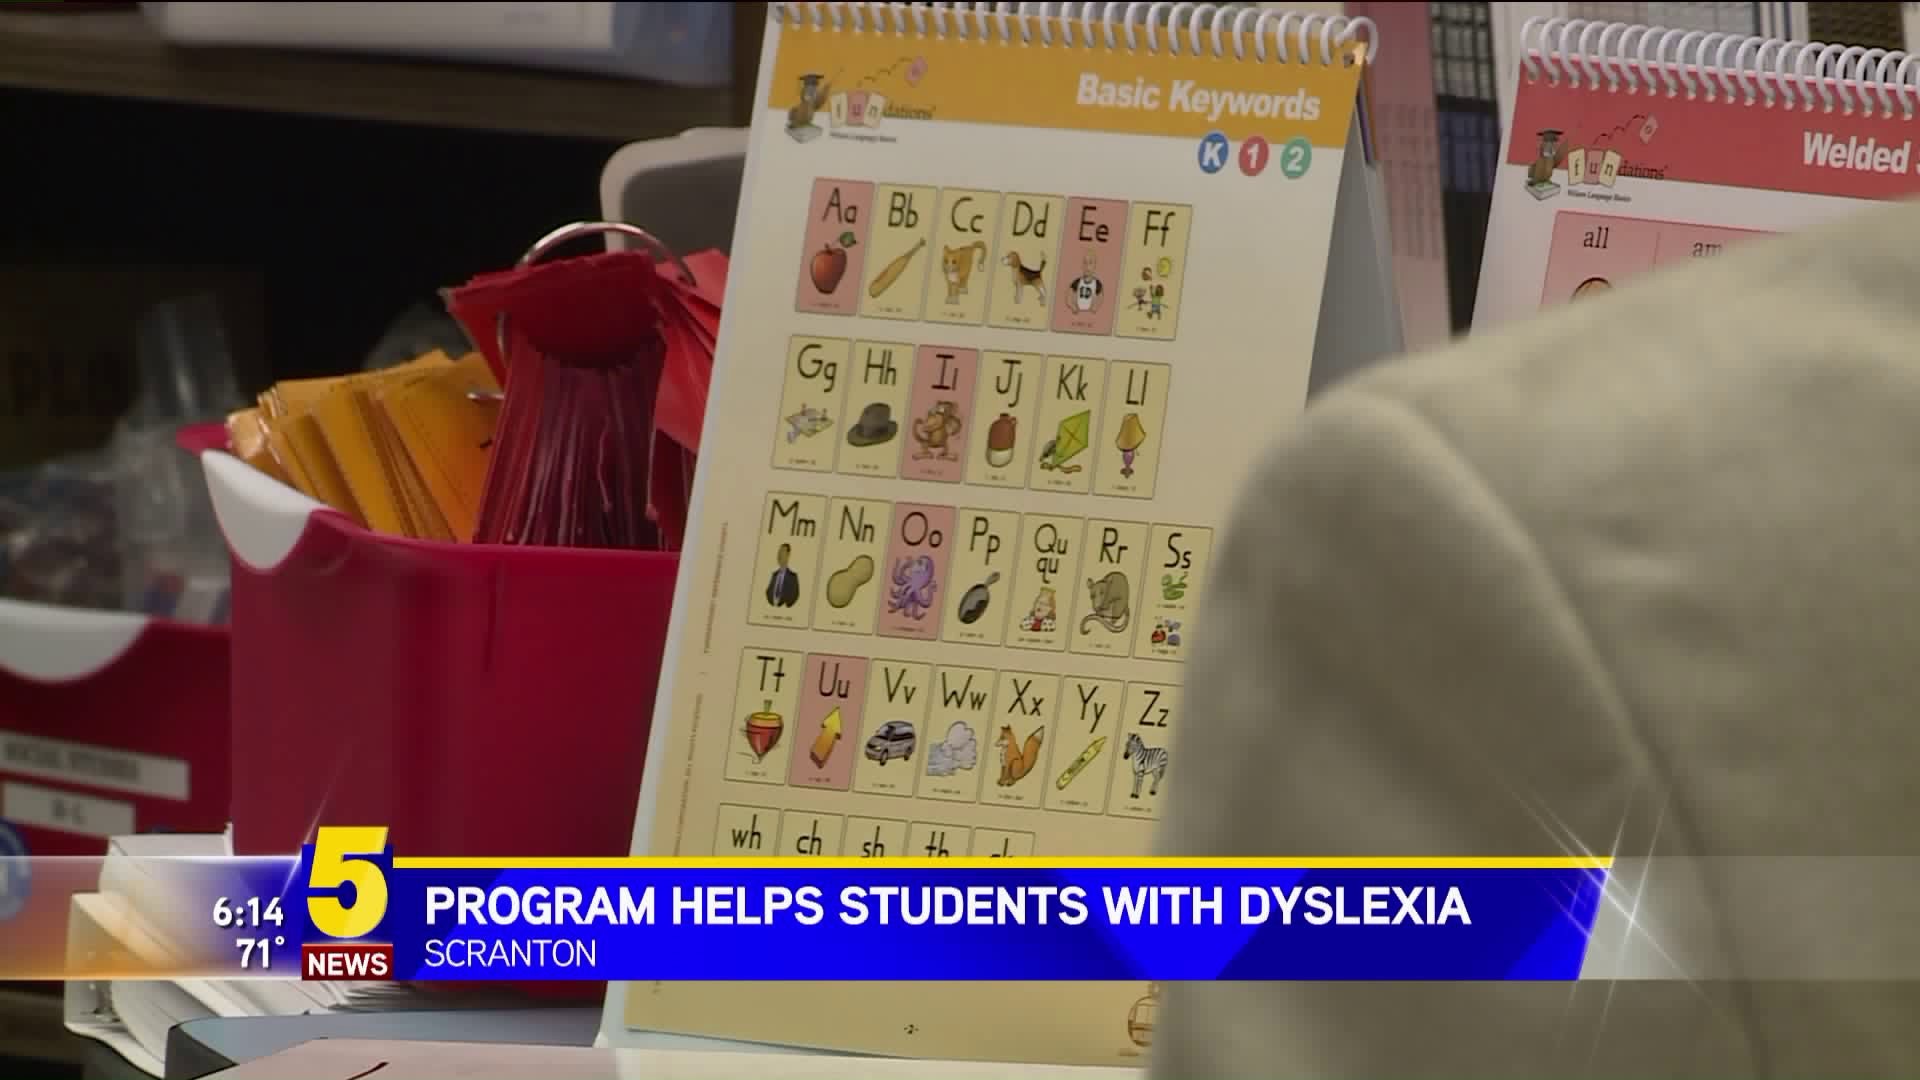 Program Helps Students With Dyslexia